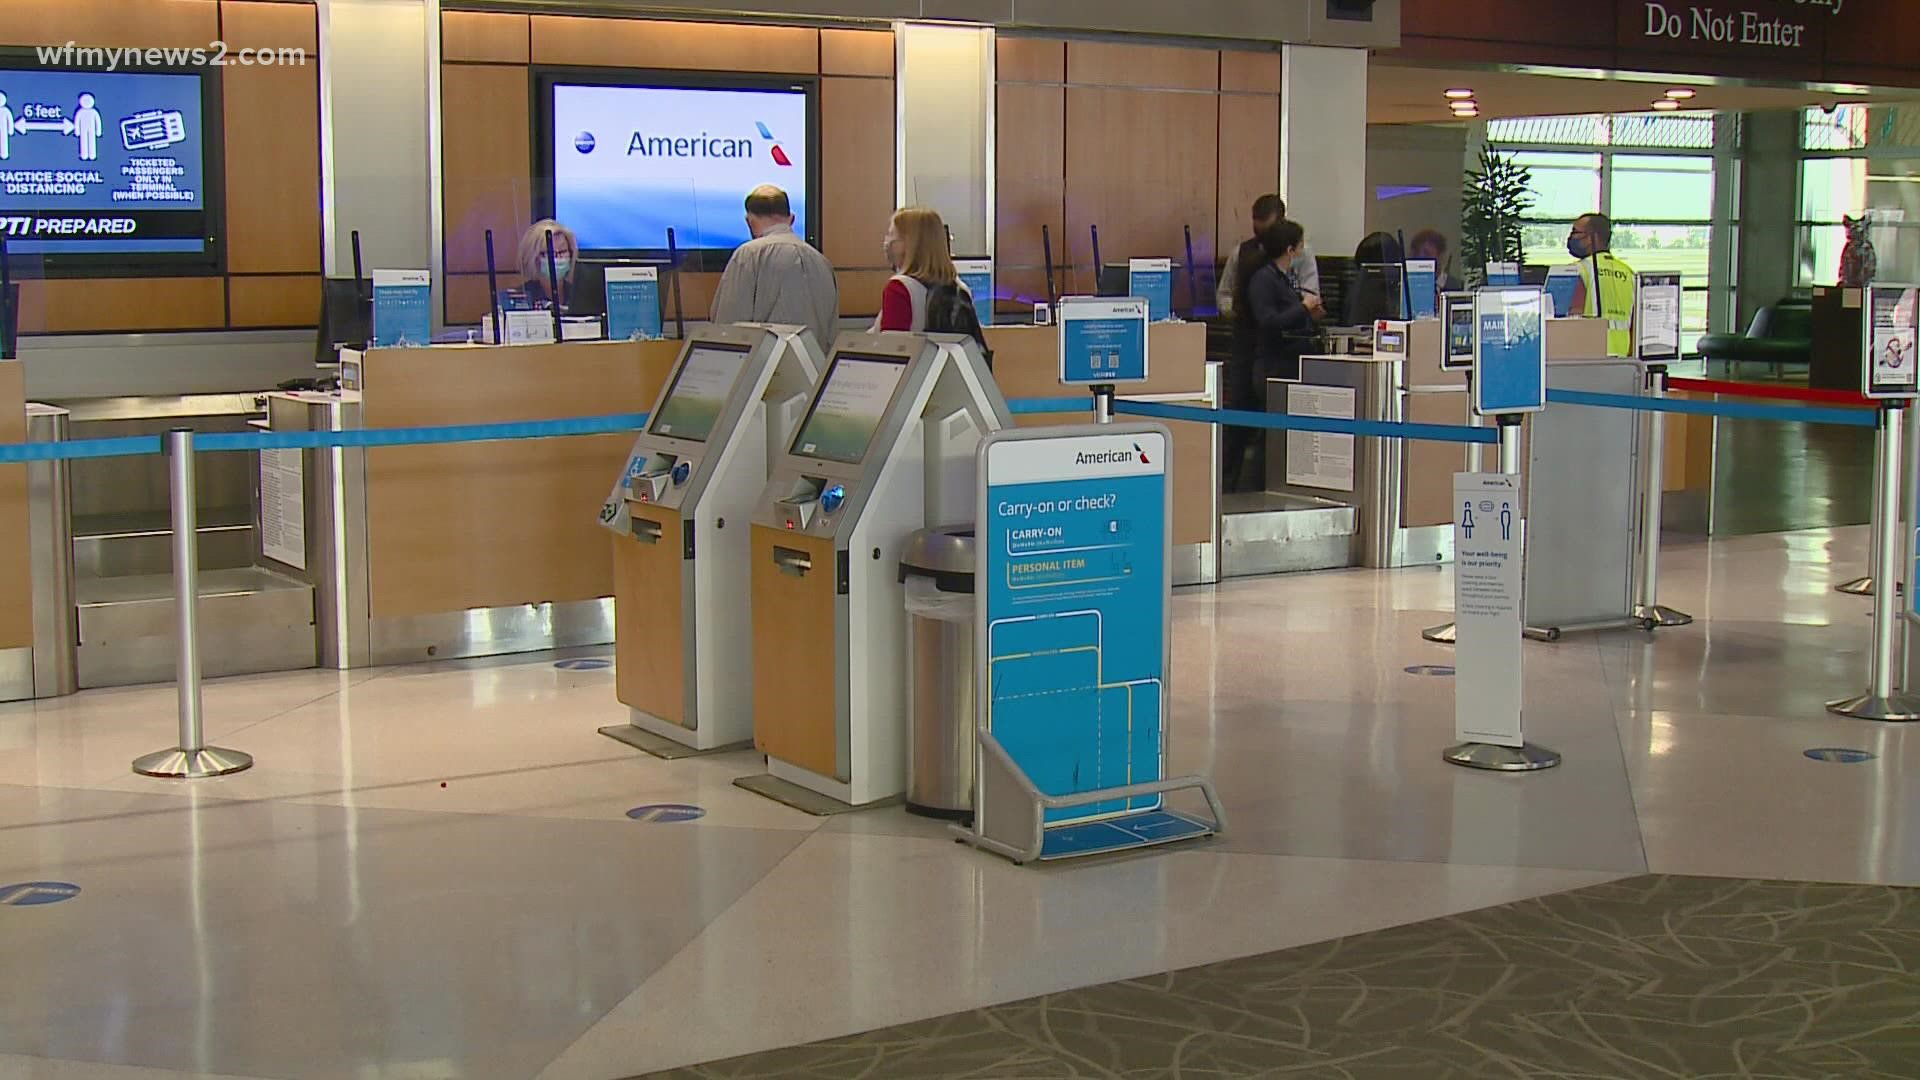 PTI airport officials describe the rising number of travelers they’re seeing through terminals.